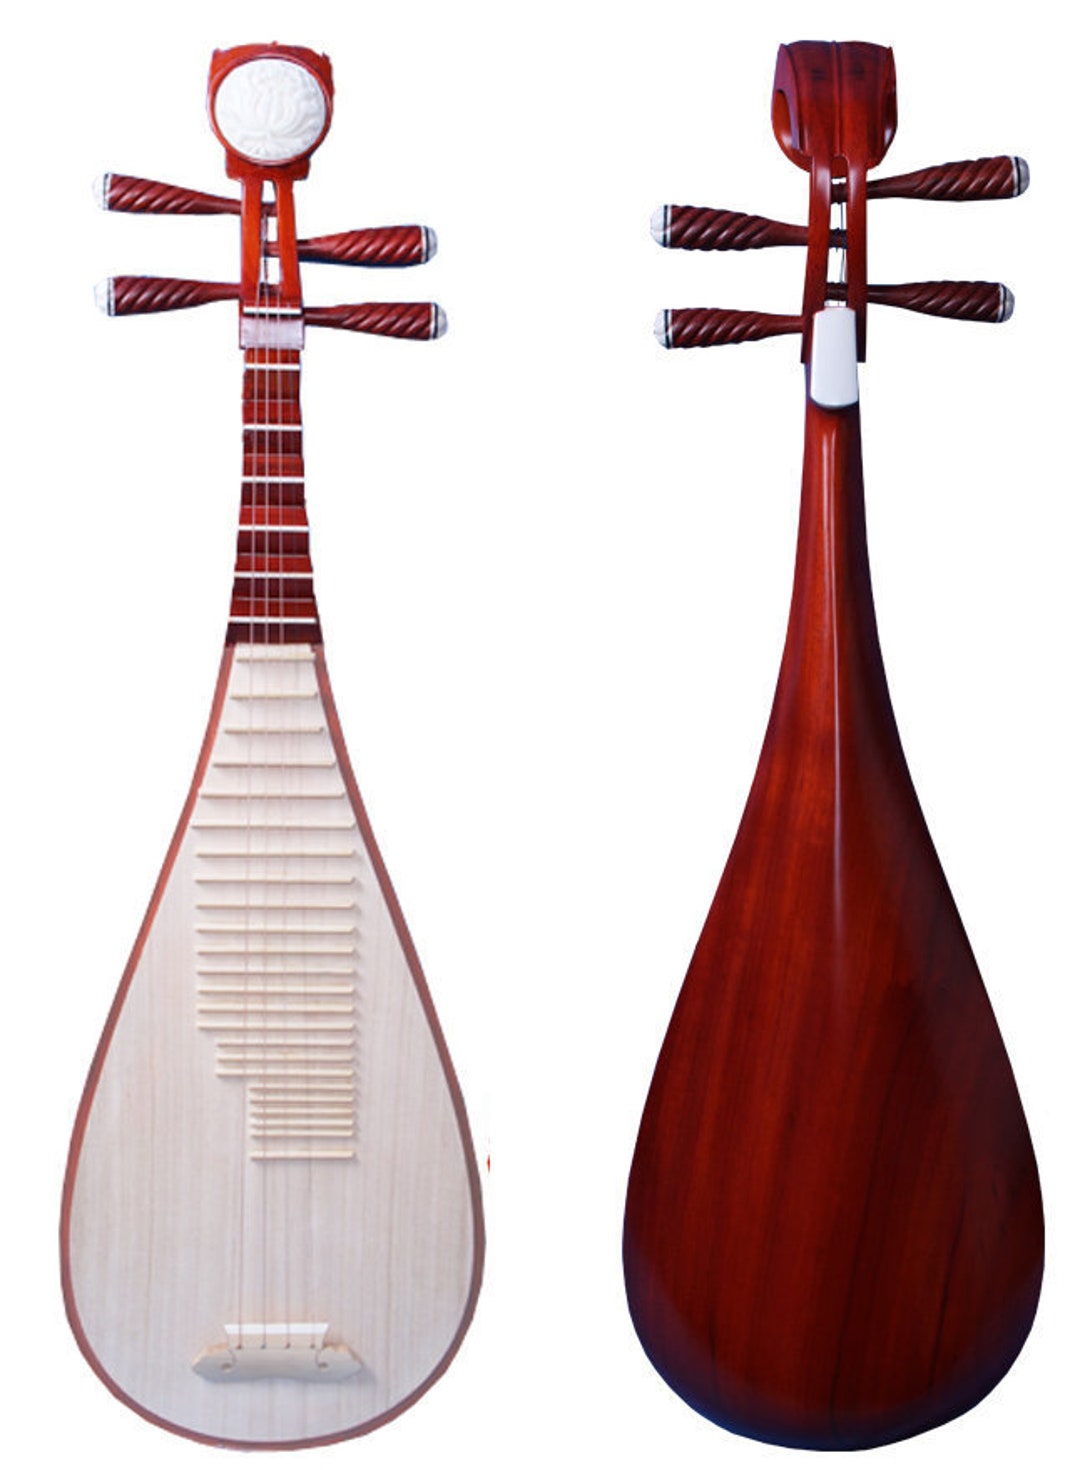 home made asian musical instruments Xxx Pics Hd